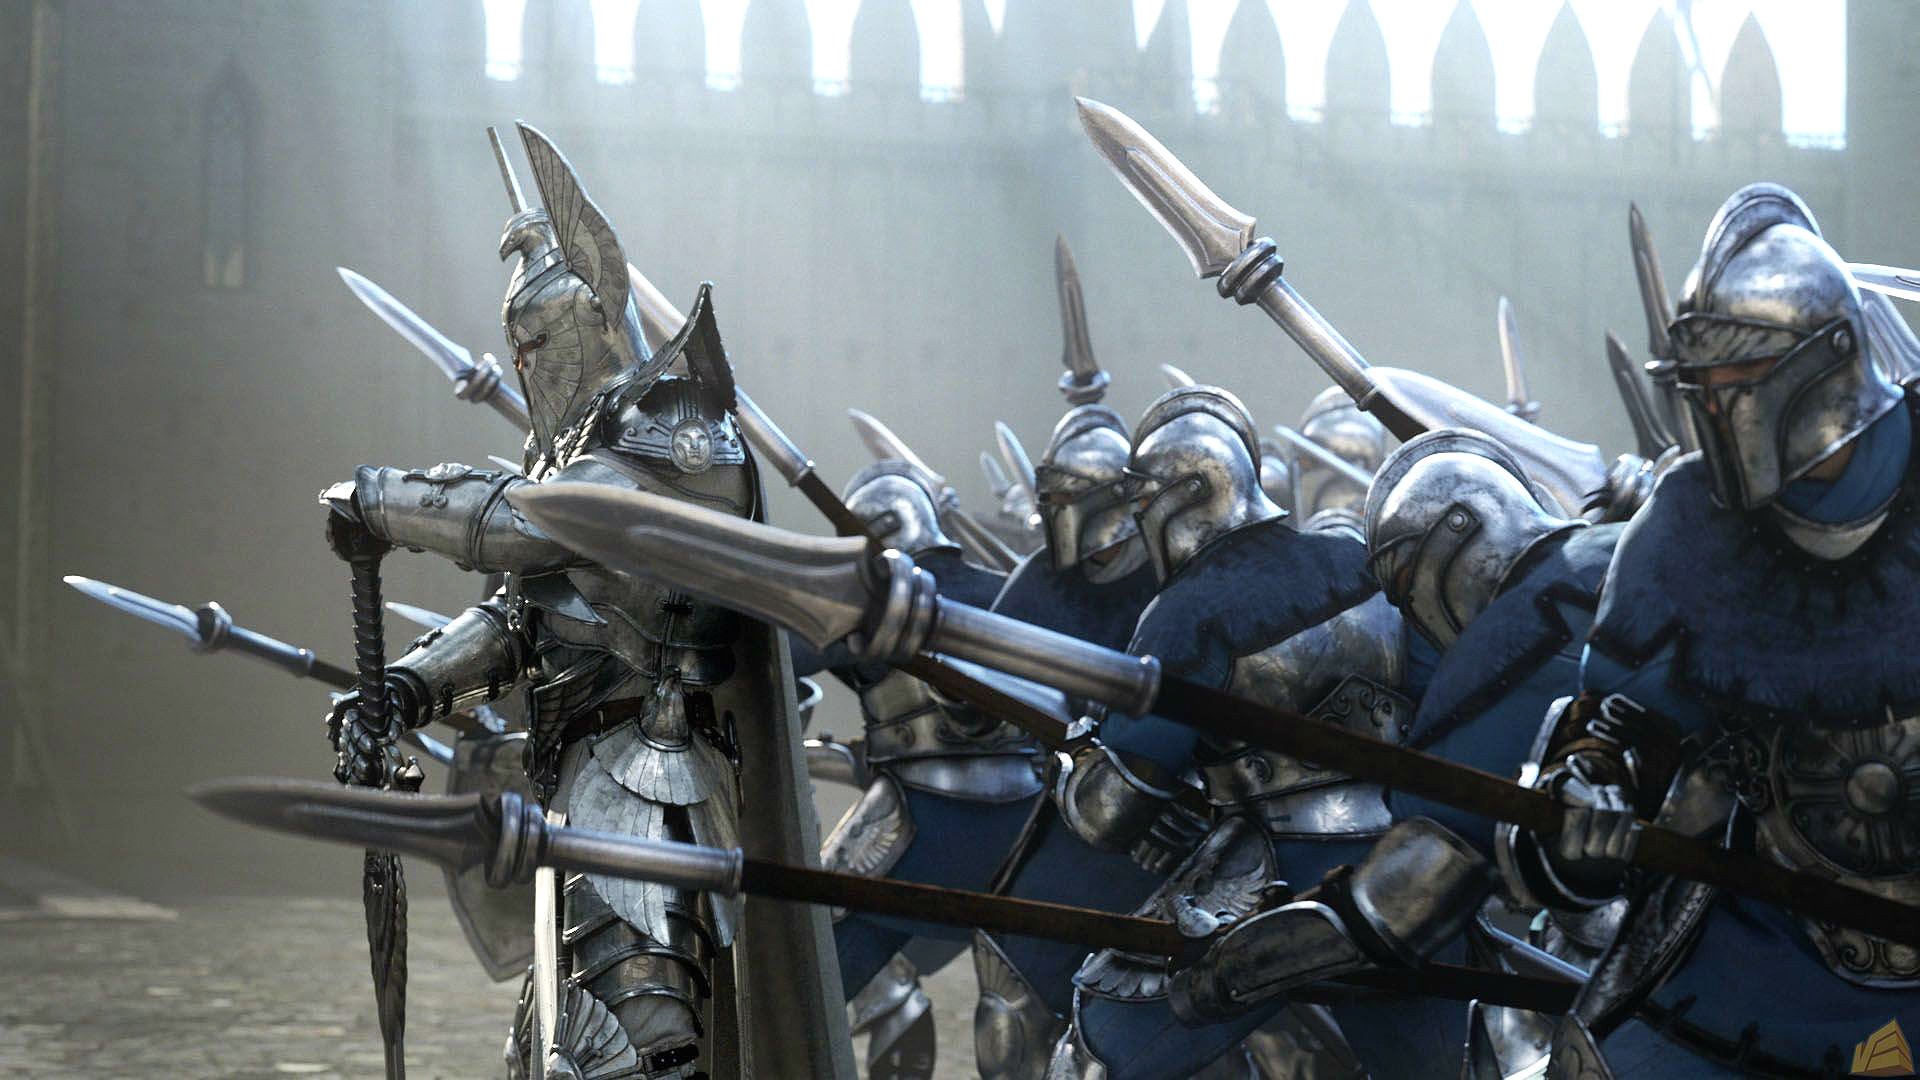 heroes, Might, Magic, Strategy, Fantasy, Fighting, Adventure, Action, Online, 1hmm, Warrior, Knight, Armor Wallpaper